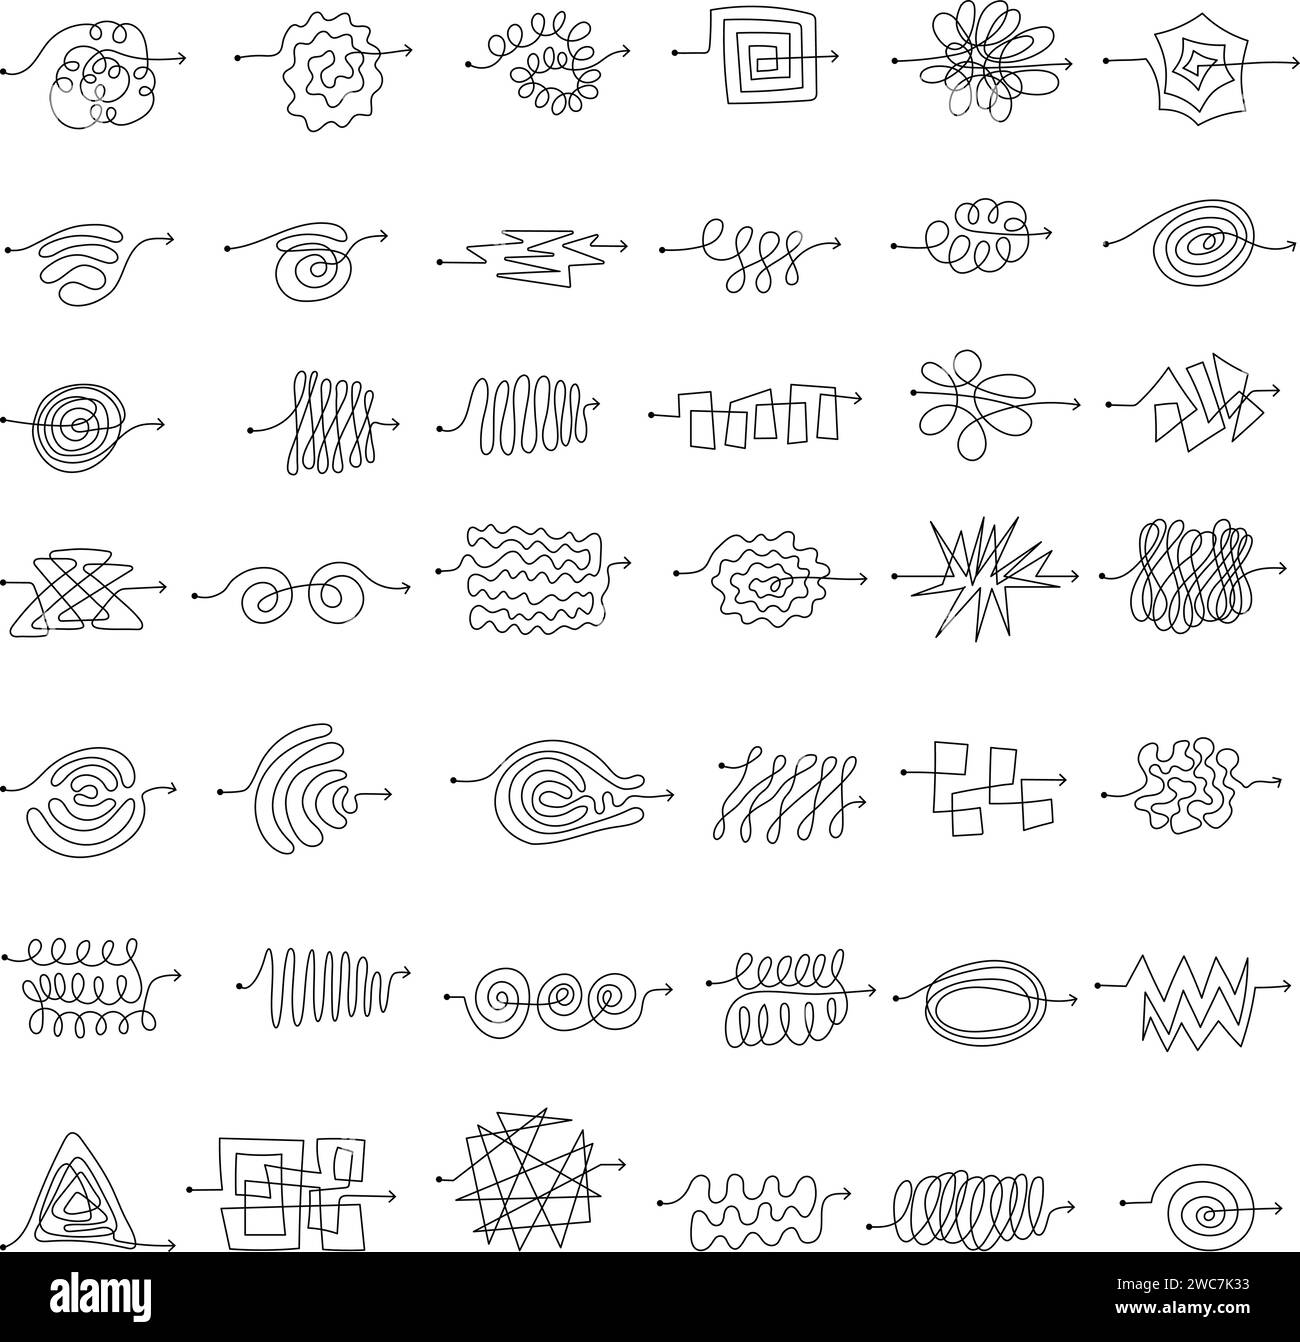 Knot messy lines. Curved writing path recent vector business concept Stock Vector